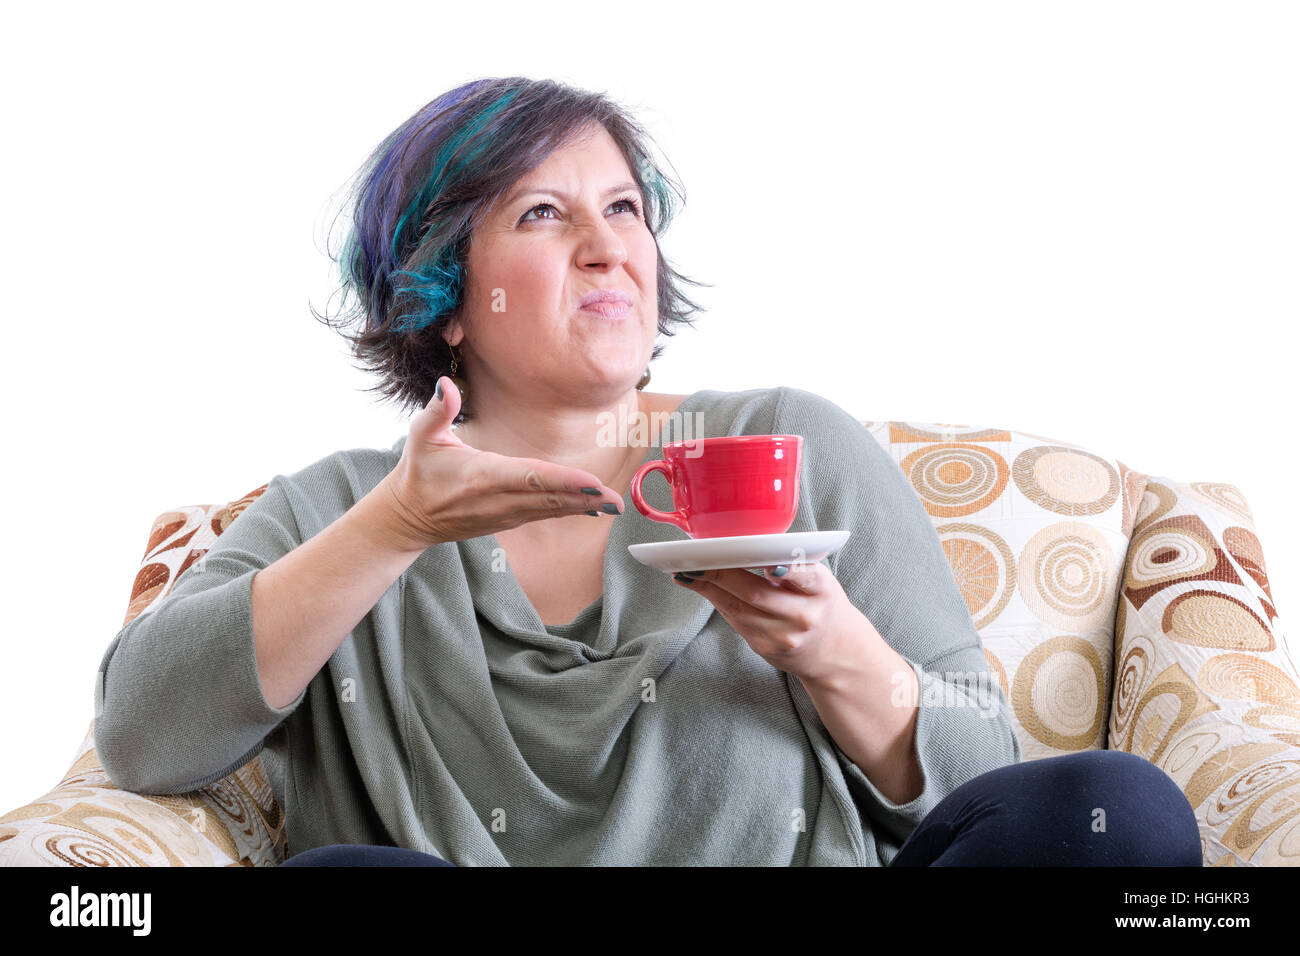 Grimacing woman sat in chair gesturing unhappily at cup of coffee or coffee, white background Stock Photo